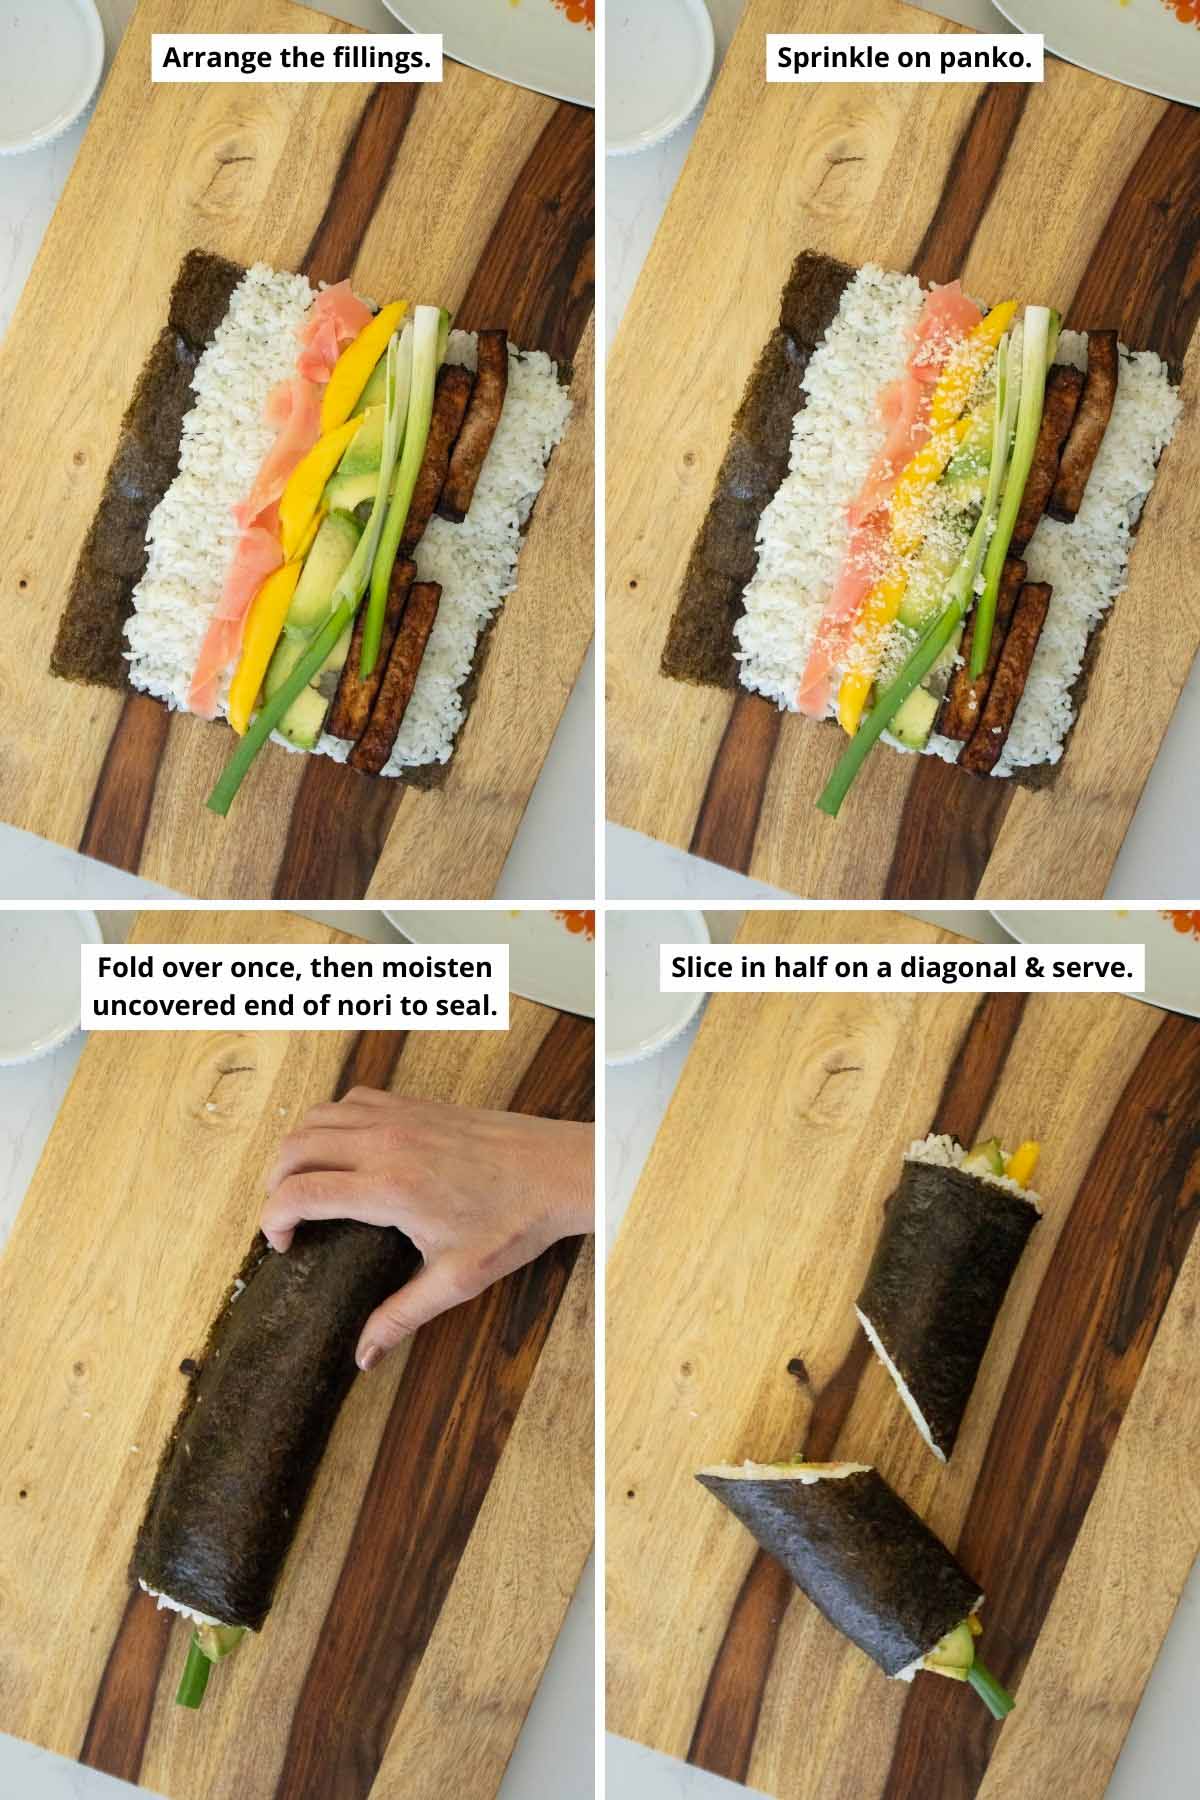 image collage showing the sushi burrito fillings before rolling and with panko on top, the roll after rolling it up and after slicing